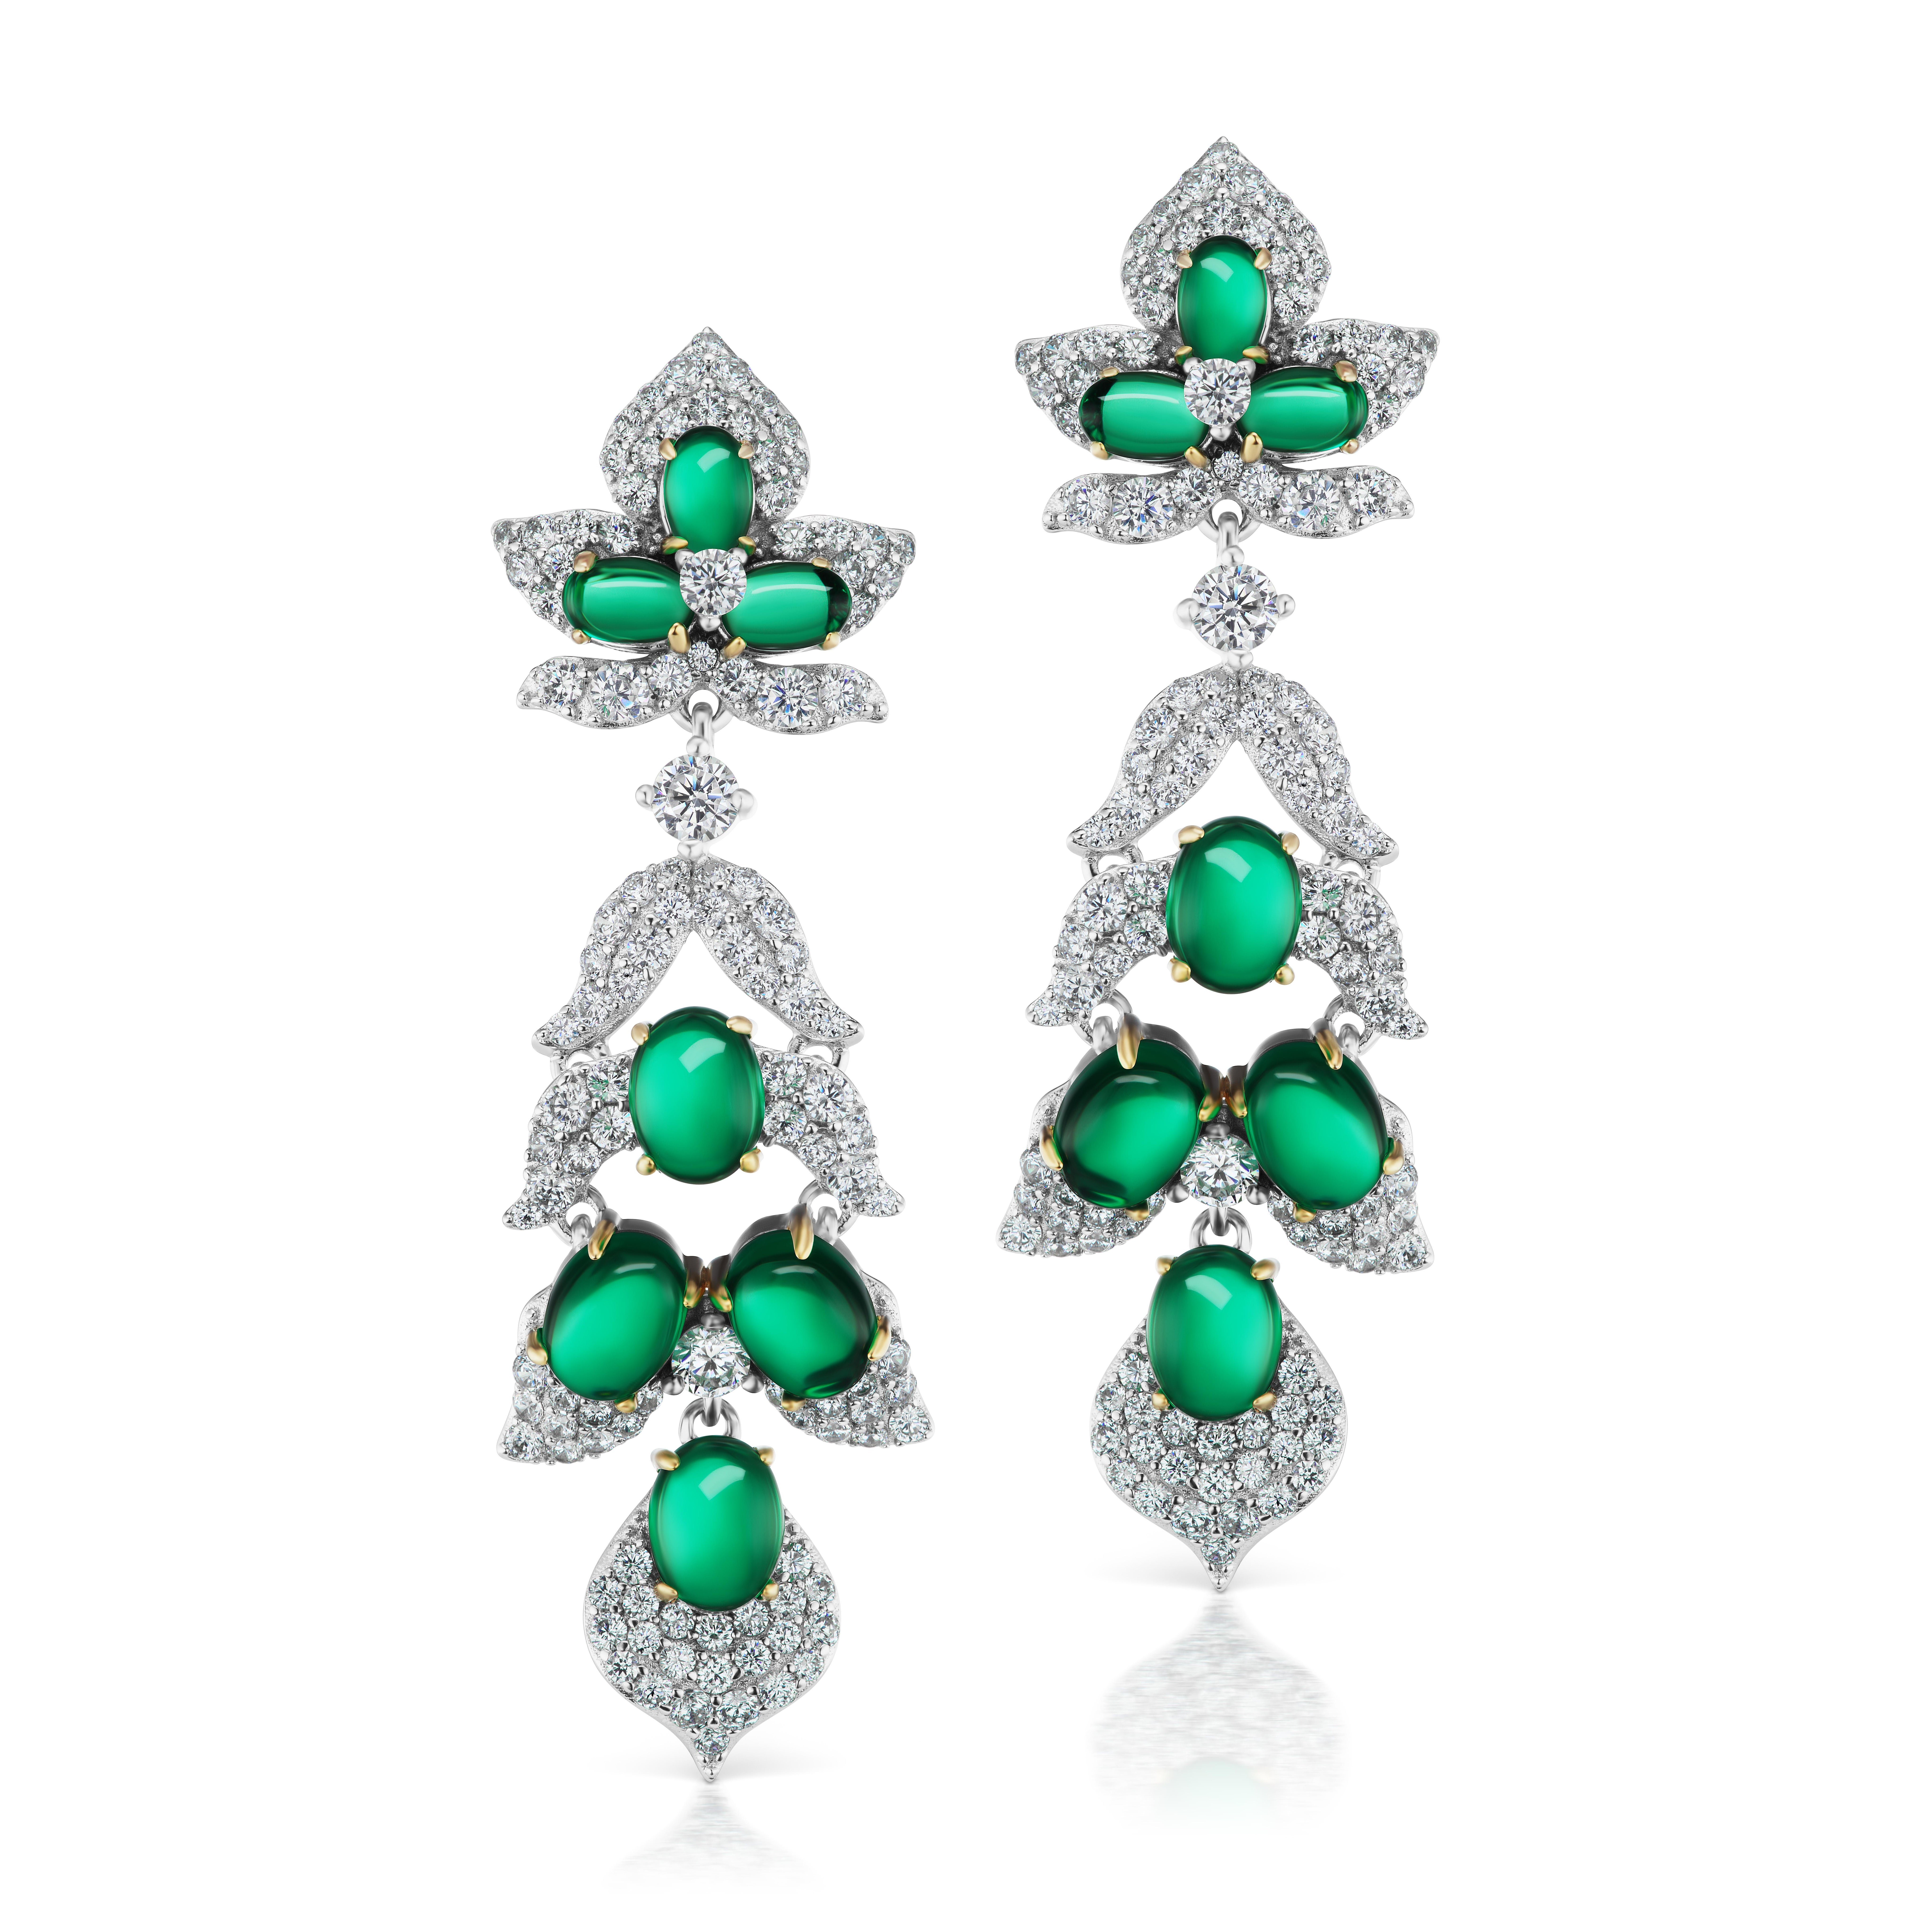 Magnificent  Costume Jewelry 1960s Style Faux Cabochon Emerald Pave CZ Diamond Earrings Superbly Made Flexible French 1960s Style  One and a half inches long